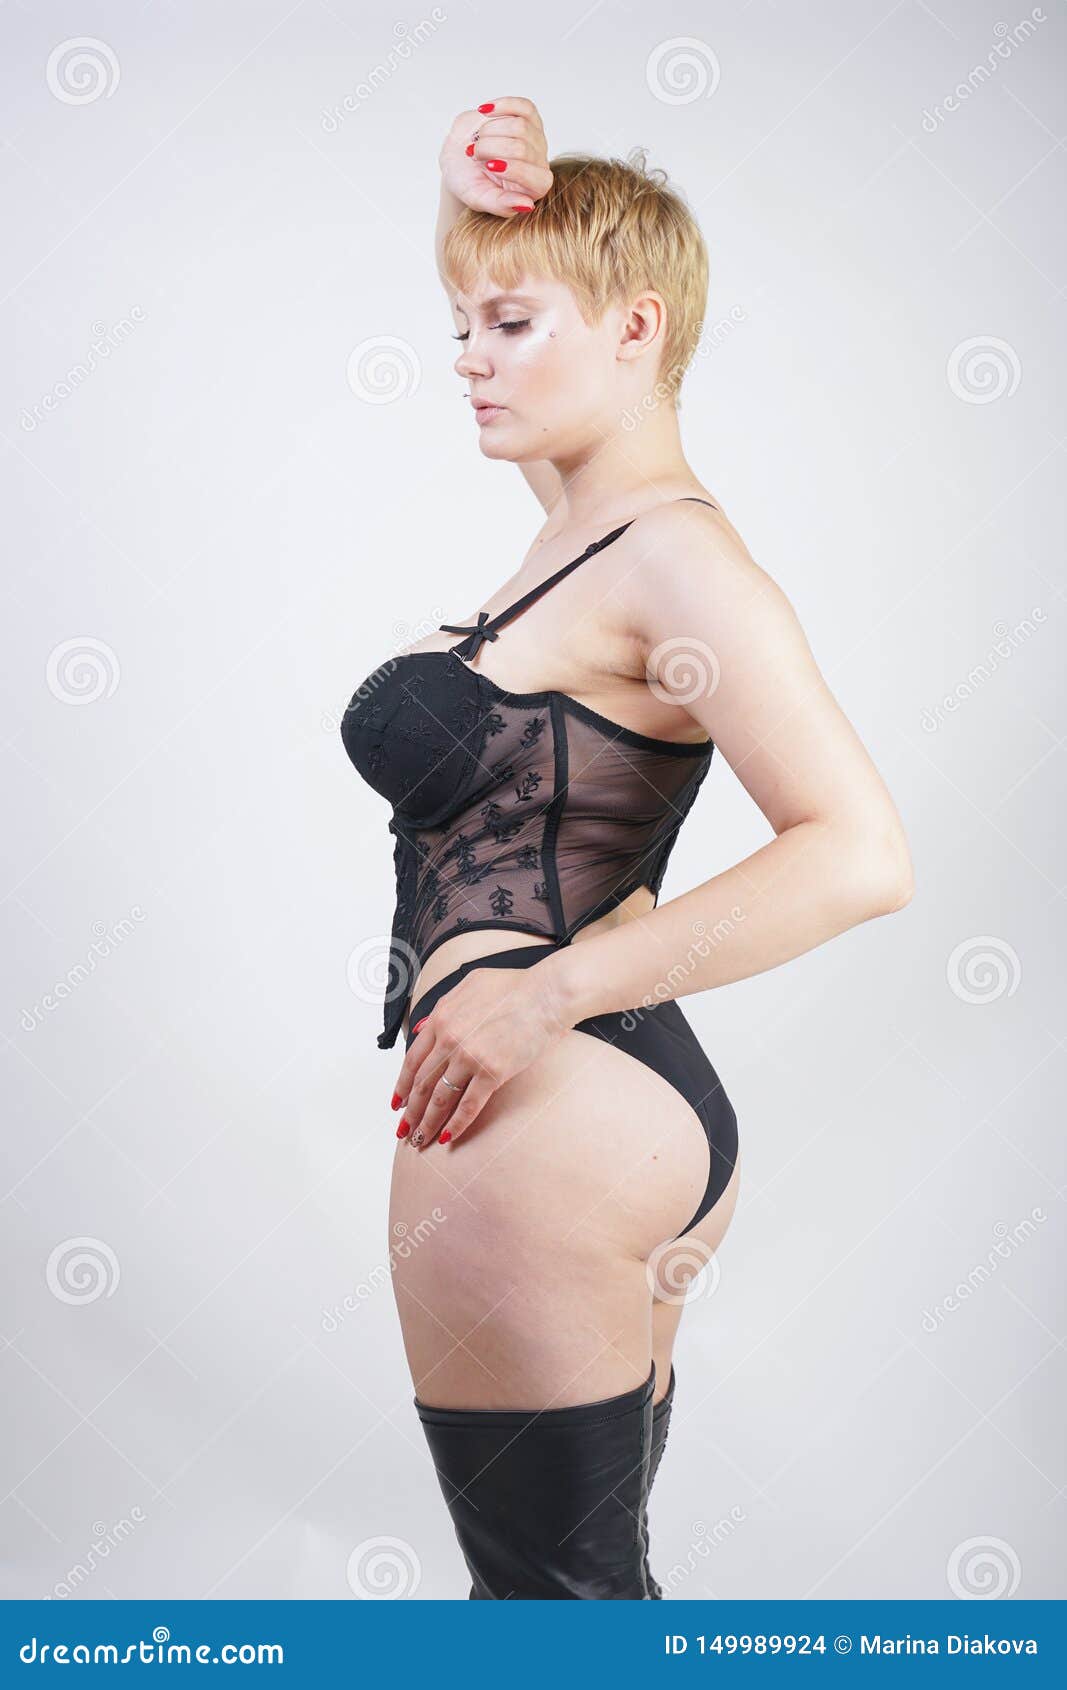 Hot Sexual Young Blonde Woman Short Hair Wearing Fashion Lace Bodice Underwear with Leather Thigh High Platform Boots on Stock Photo - Image of dominatrix, bodice: 149989924